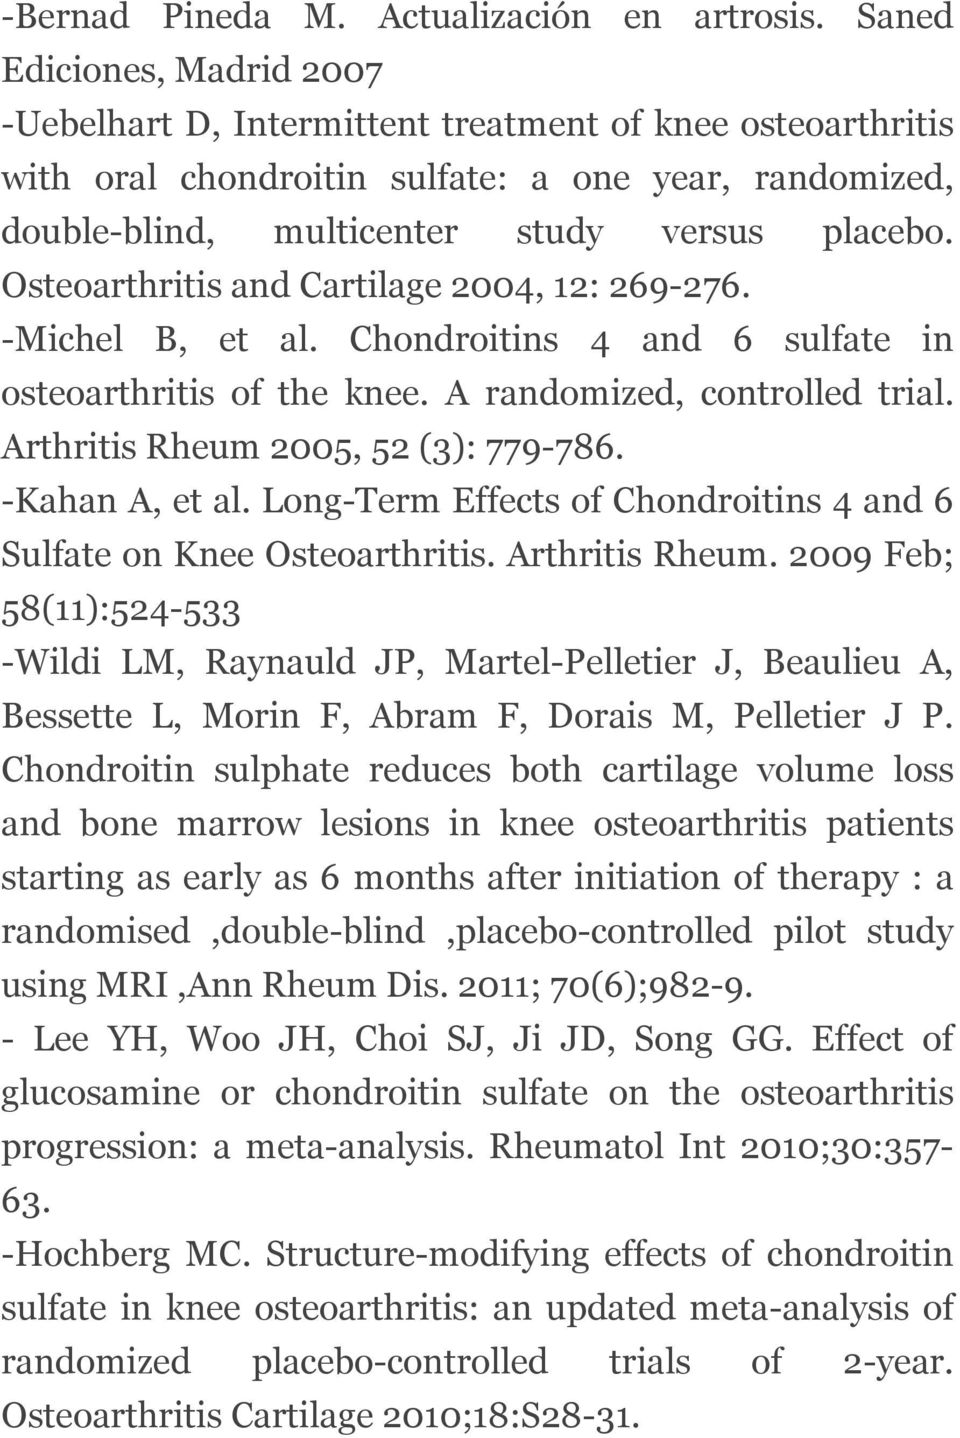 Osteoarthritis and Cartilage 2004, 12: 269-276. -Michel B, et al. Chondroitins 4 and 6 sulfate in osteoarthritis of the knee. A randomized, controlled trial. Arthritis Rheum 2005, 52 (3): 779-786.